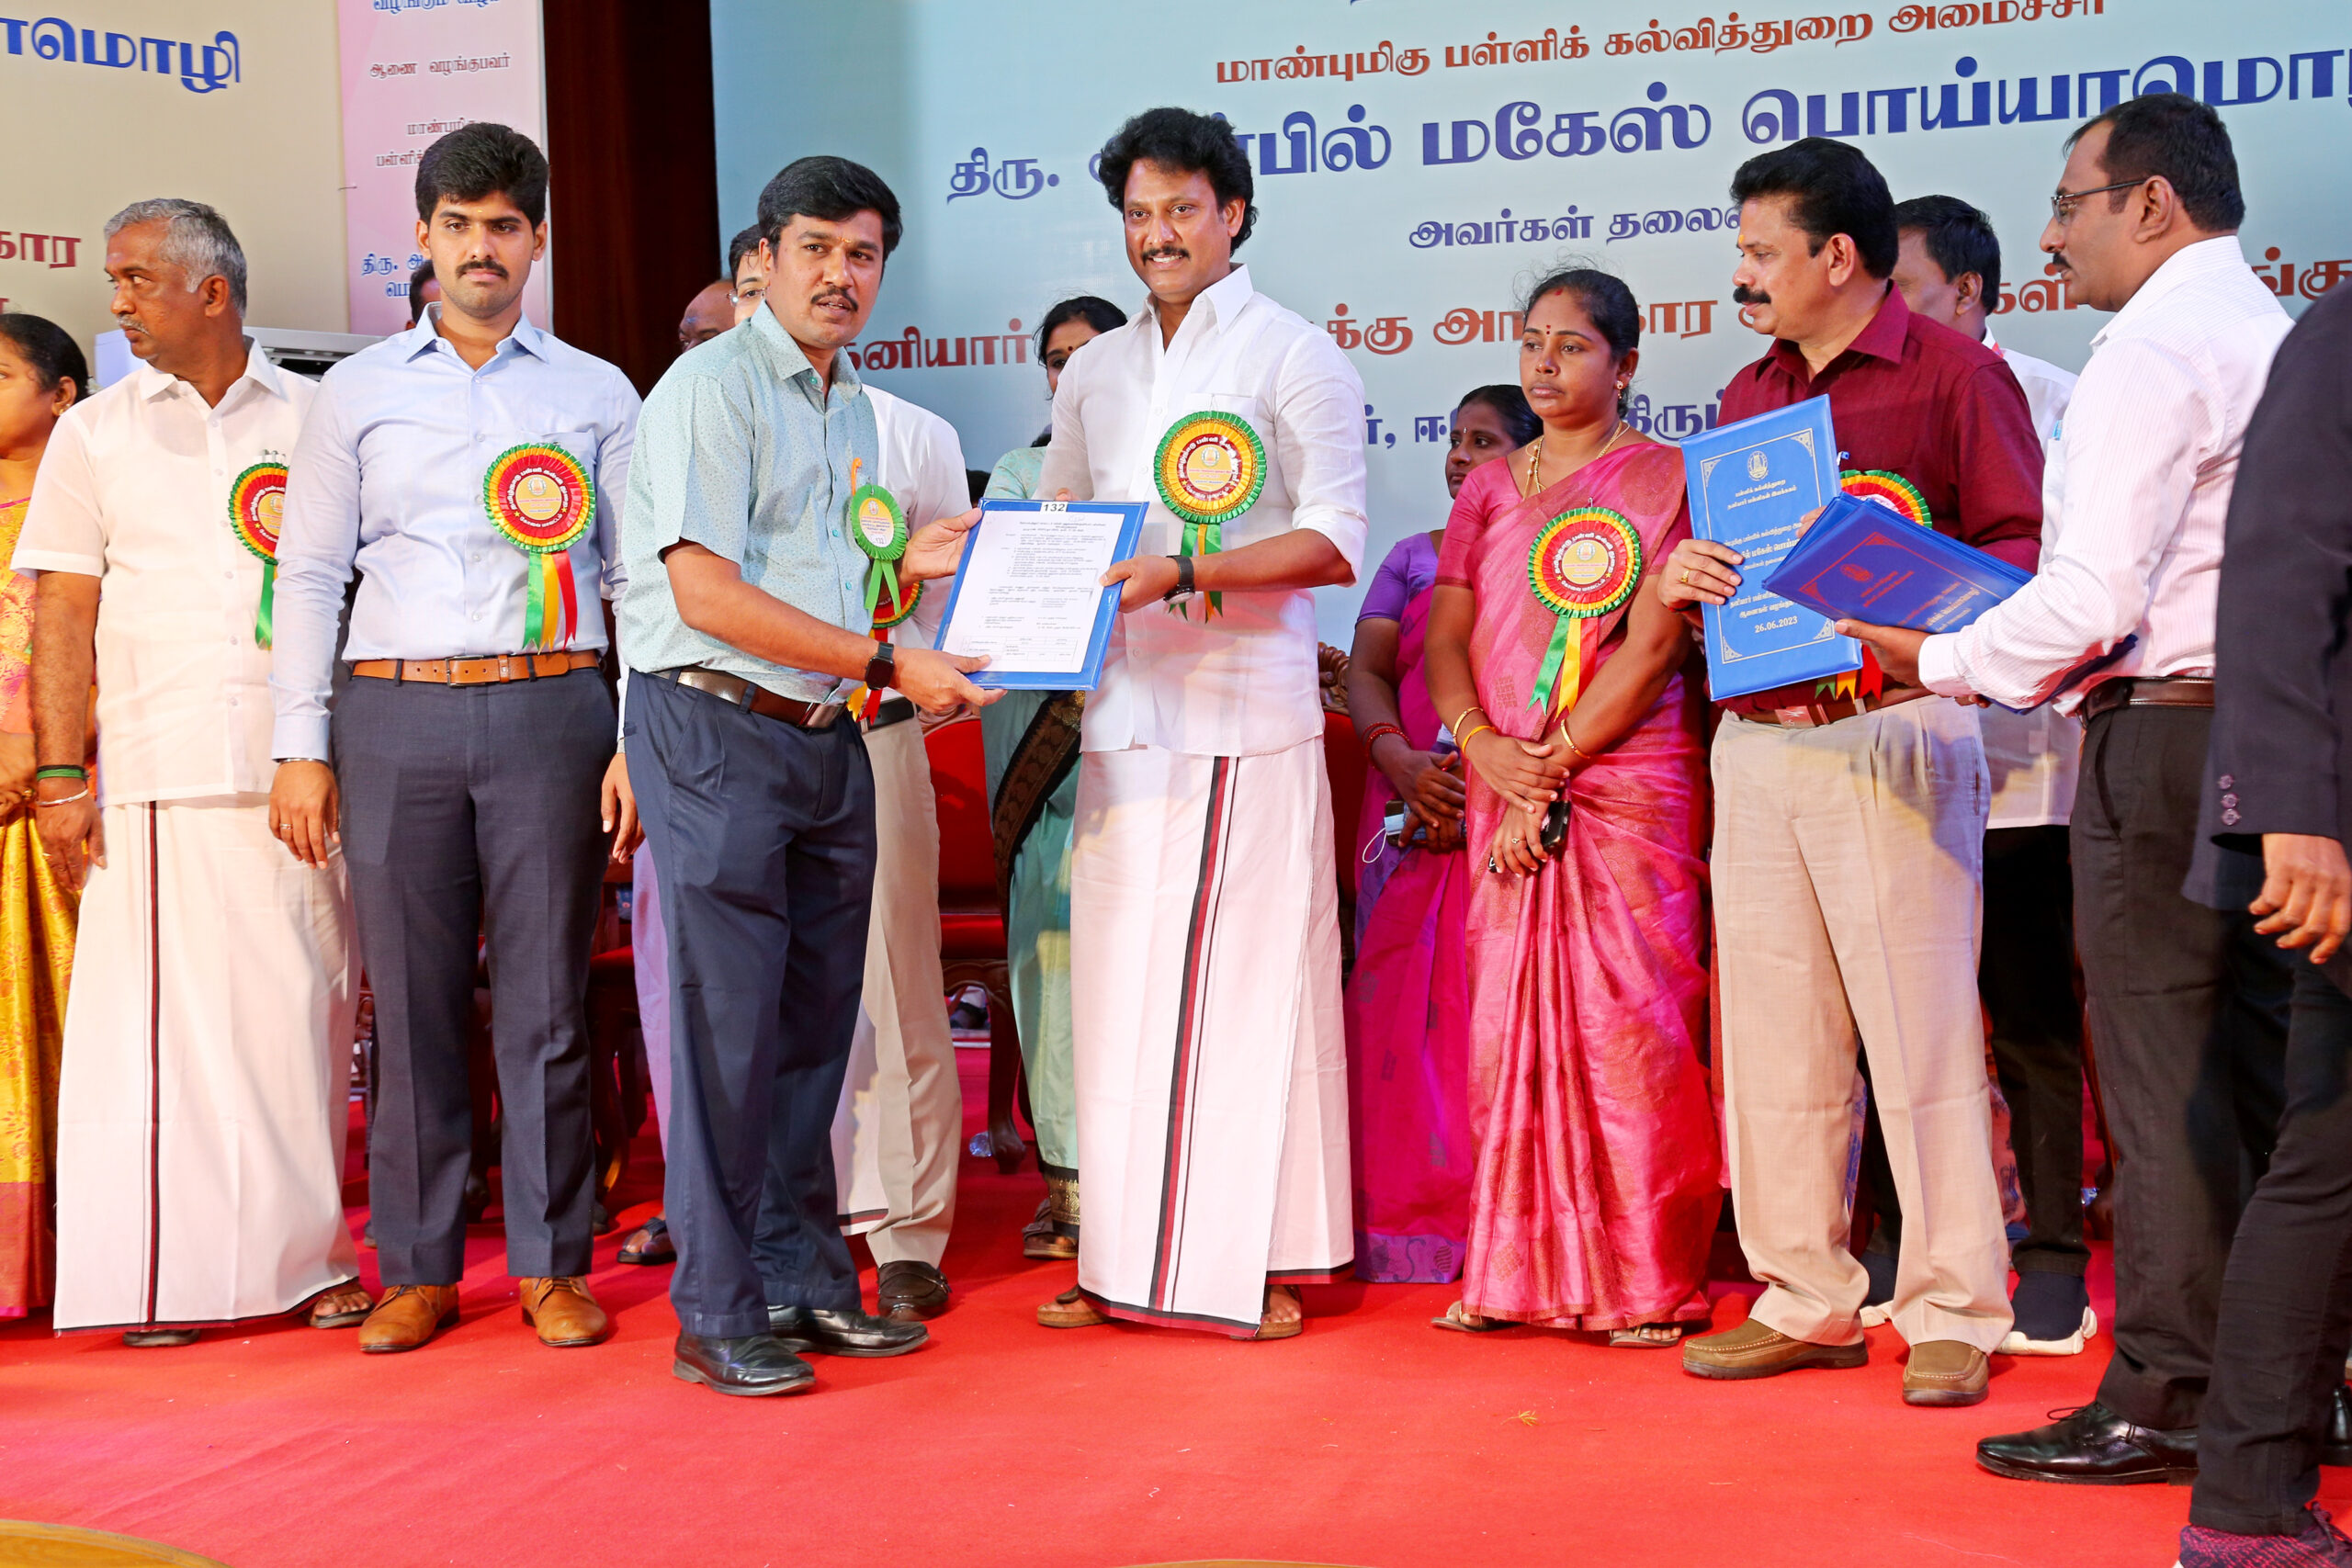 Mr.S.Boopathy, Correspondent has received the recognition for Chutties Caslte Pre-School from Thiru.Anbil Mahesh Poyyamozhi, Honourable Minister for School Education of Tamil Nadu.